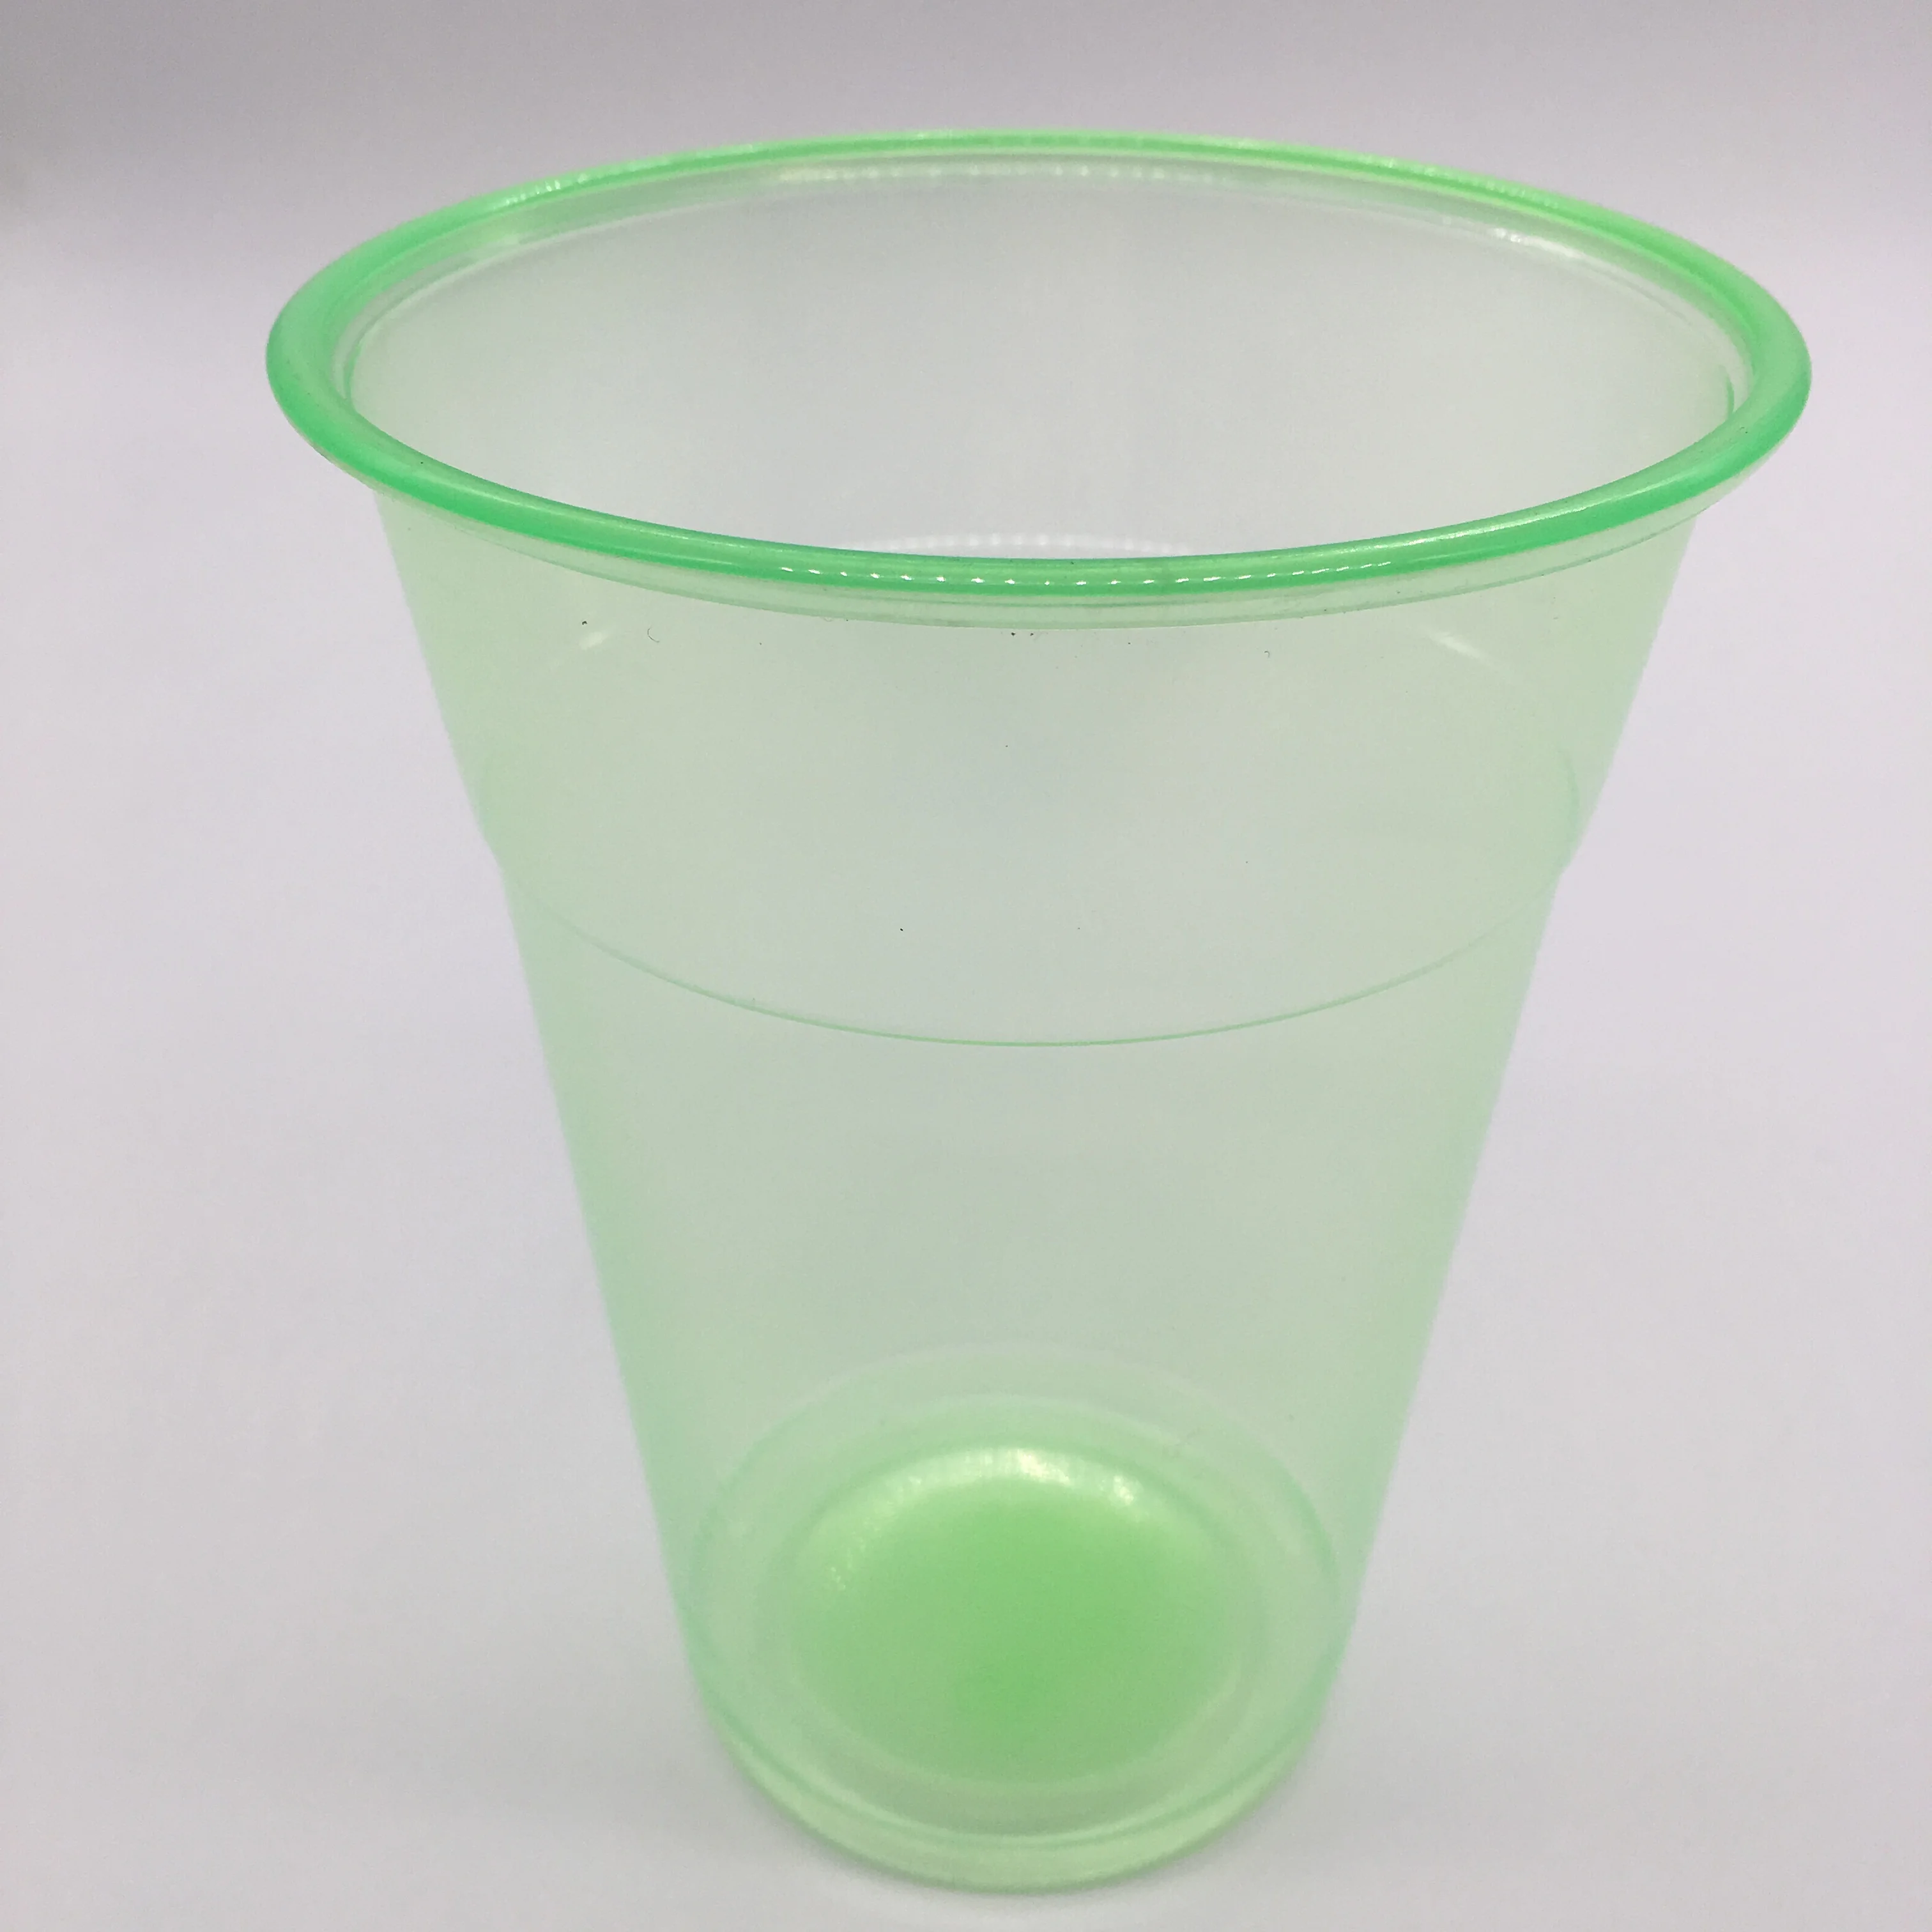 where to buy plastic cups